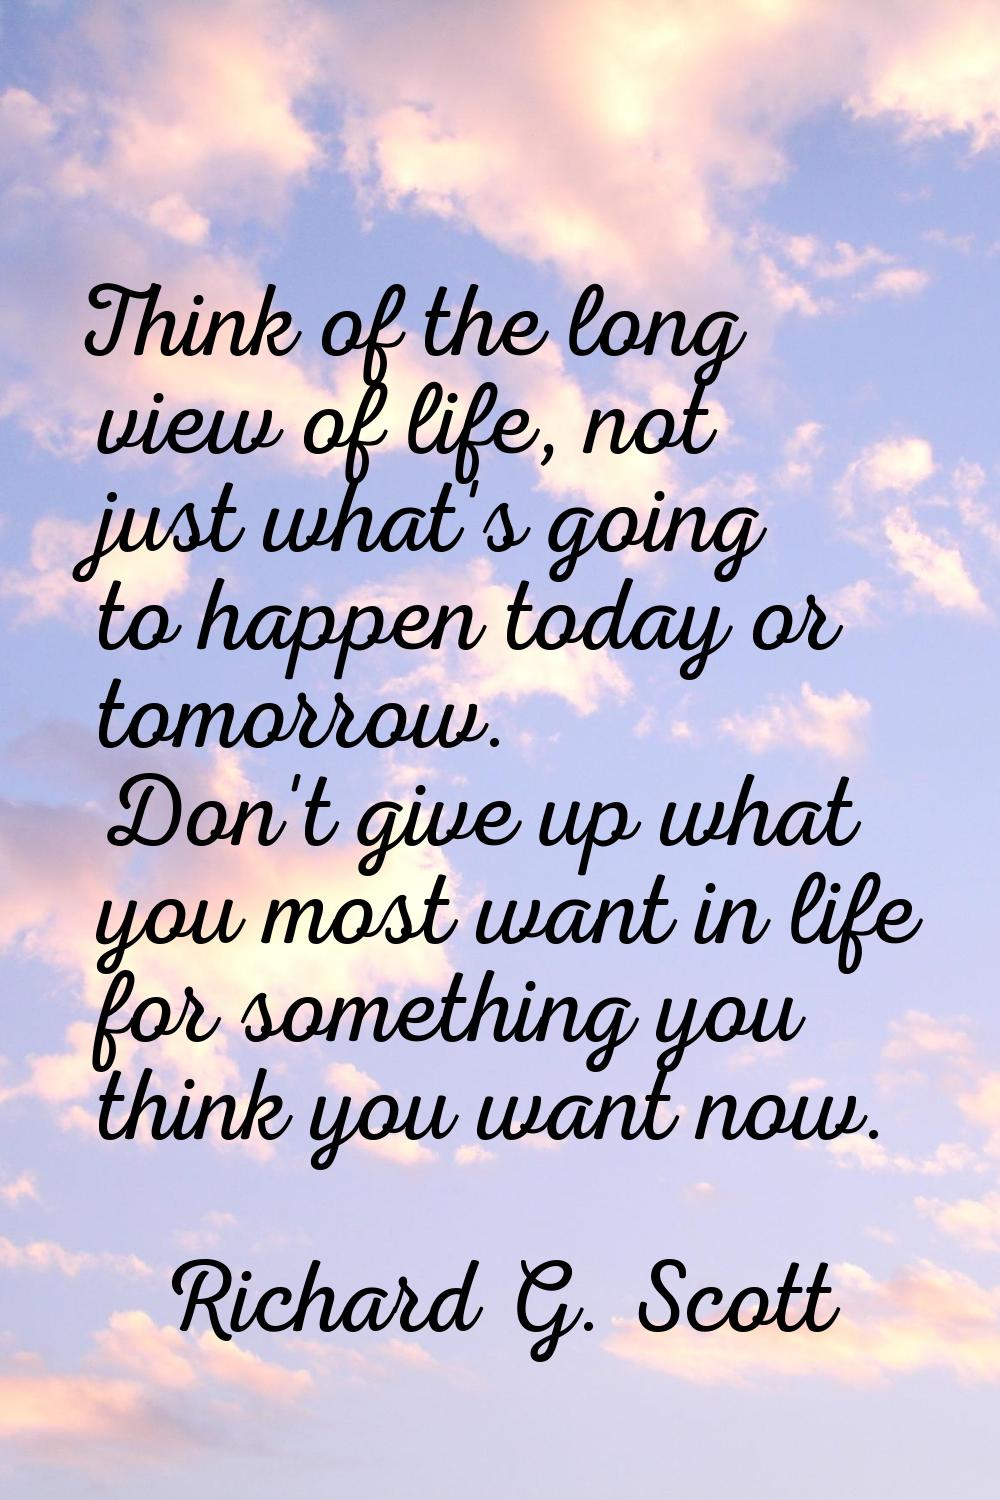 Think of the long view of life, not just what's going to happen today or tomorrow. Don't give up wh